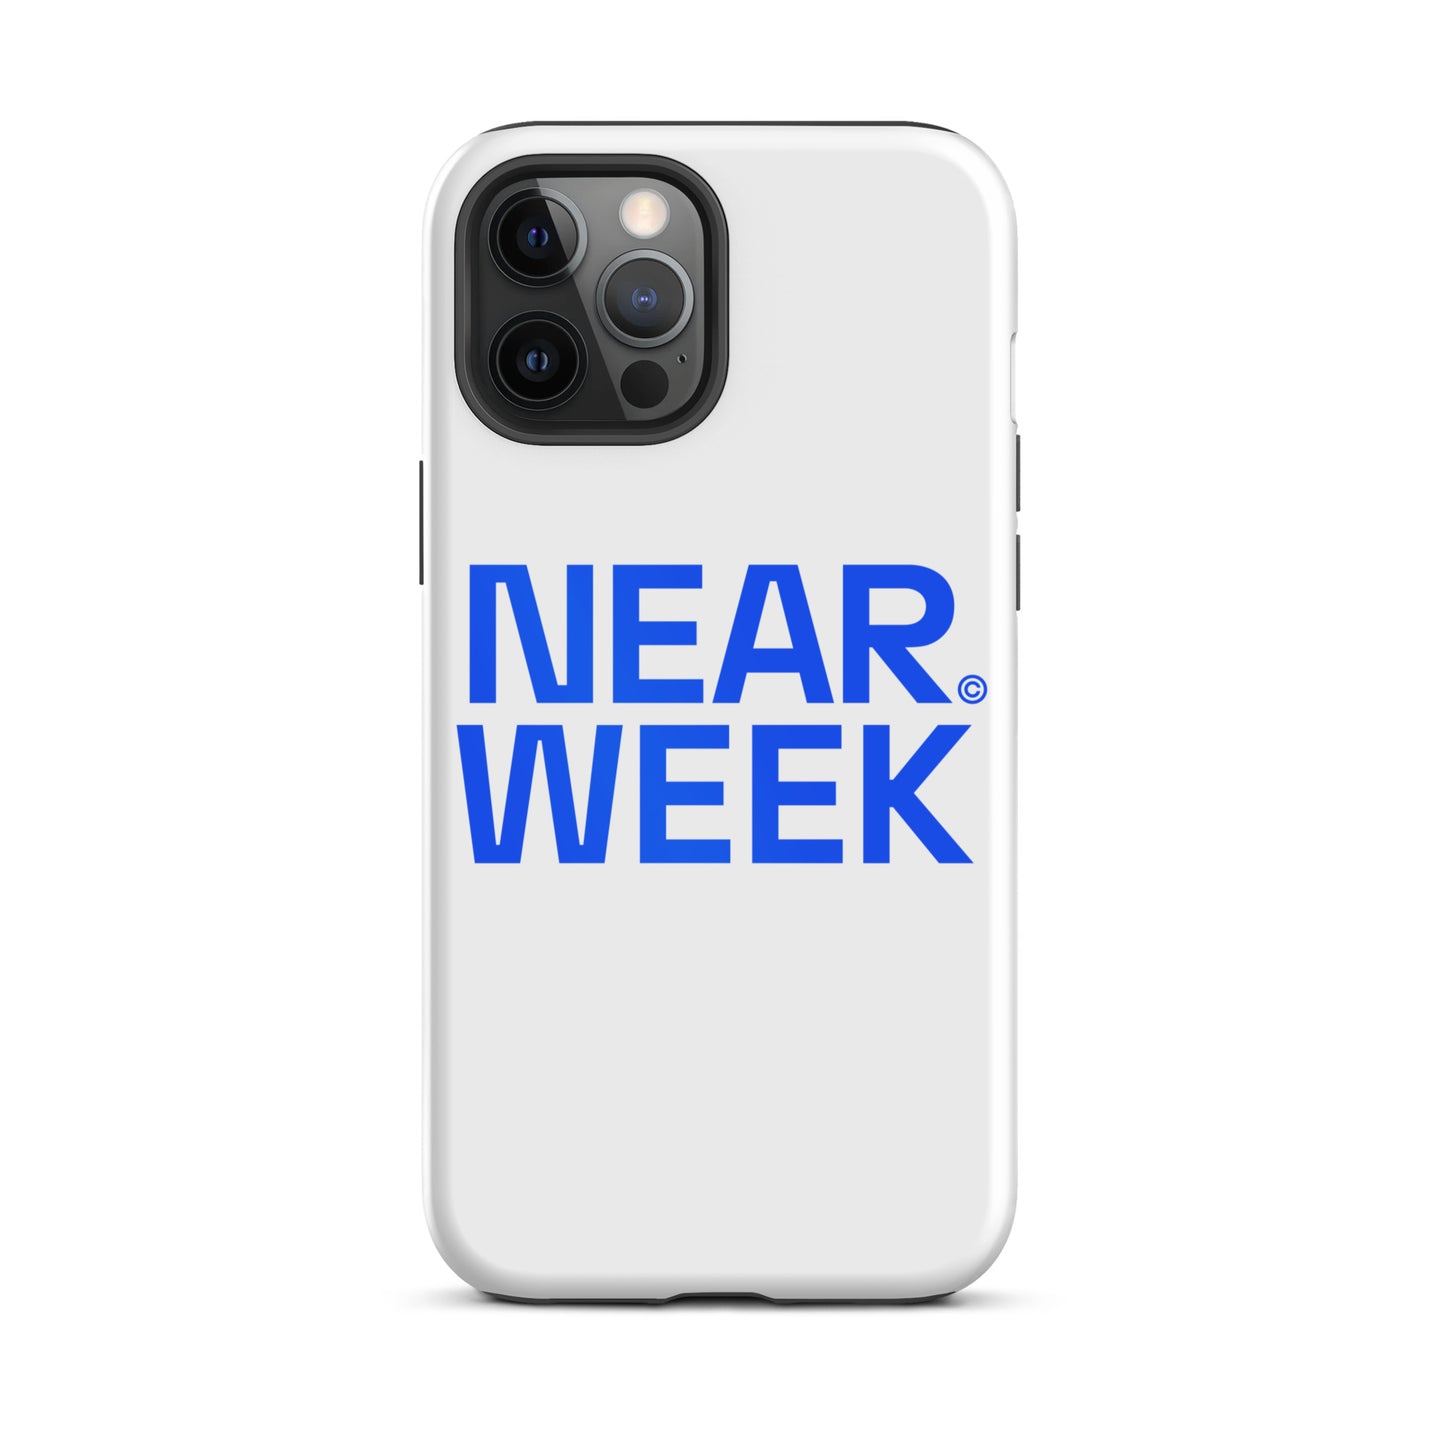 NEARWEEK Protected iPhone case